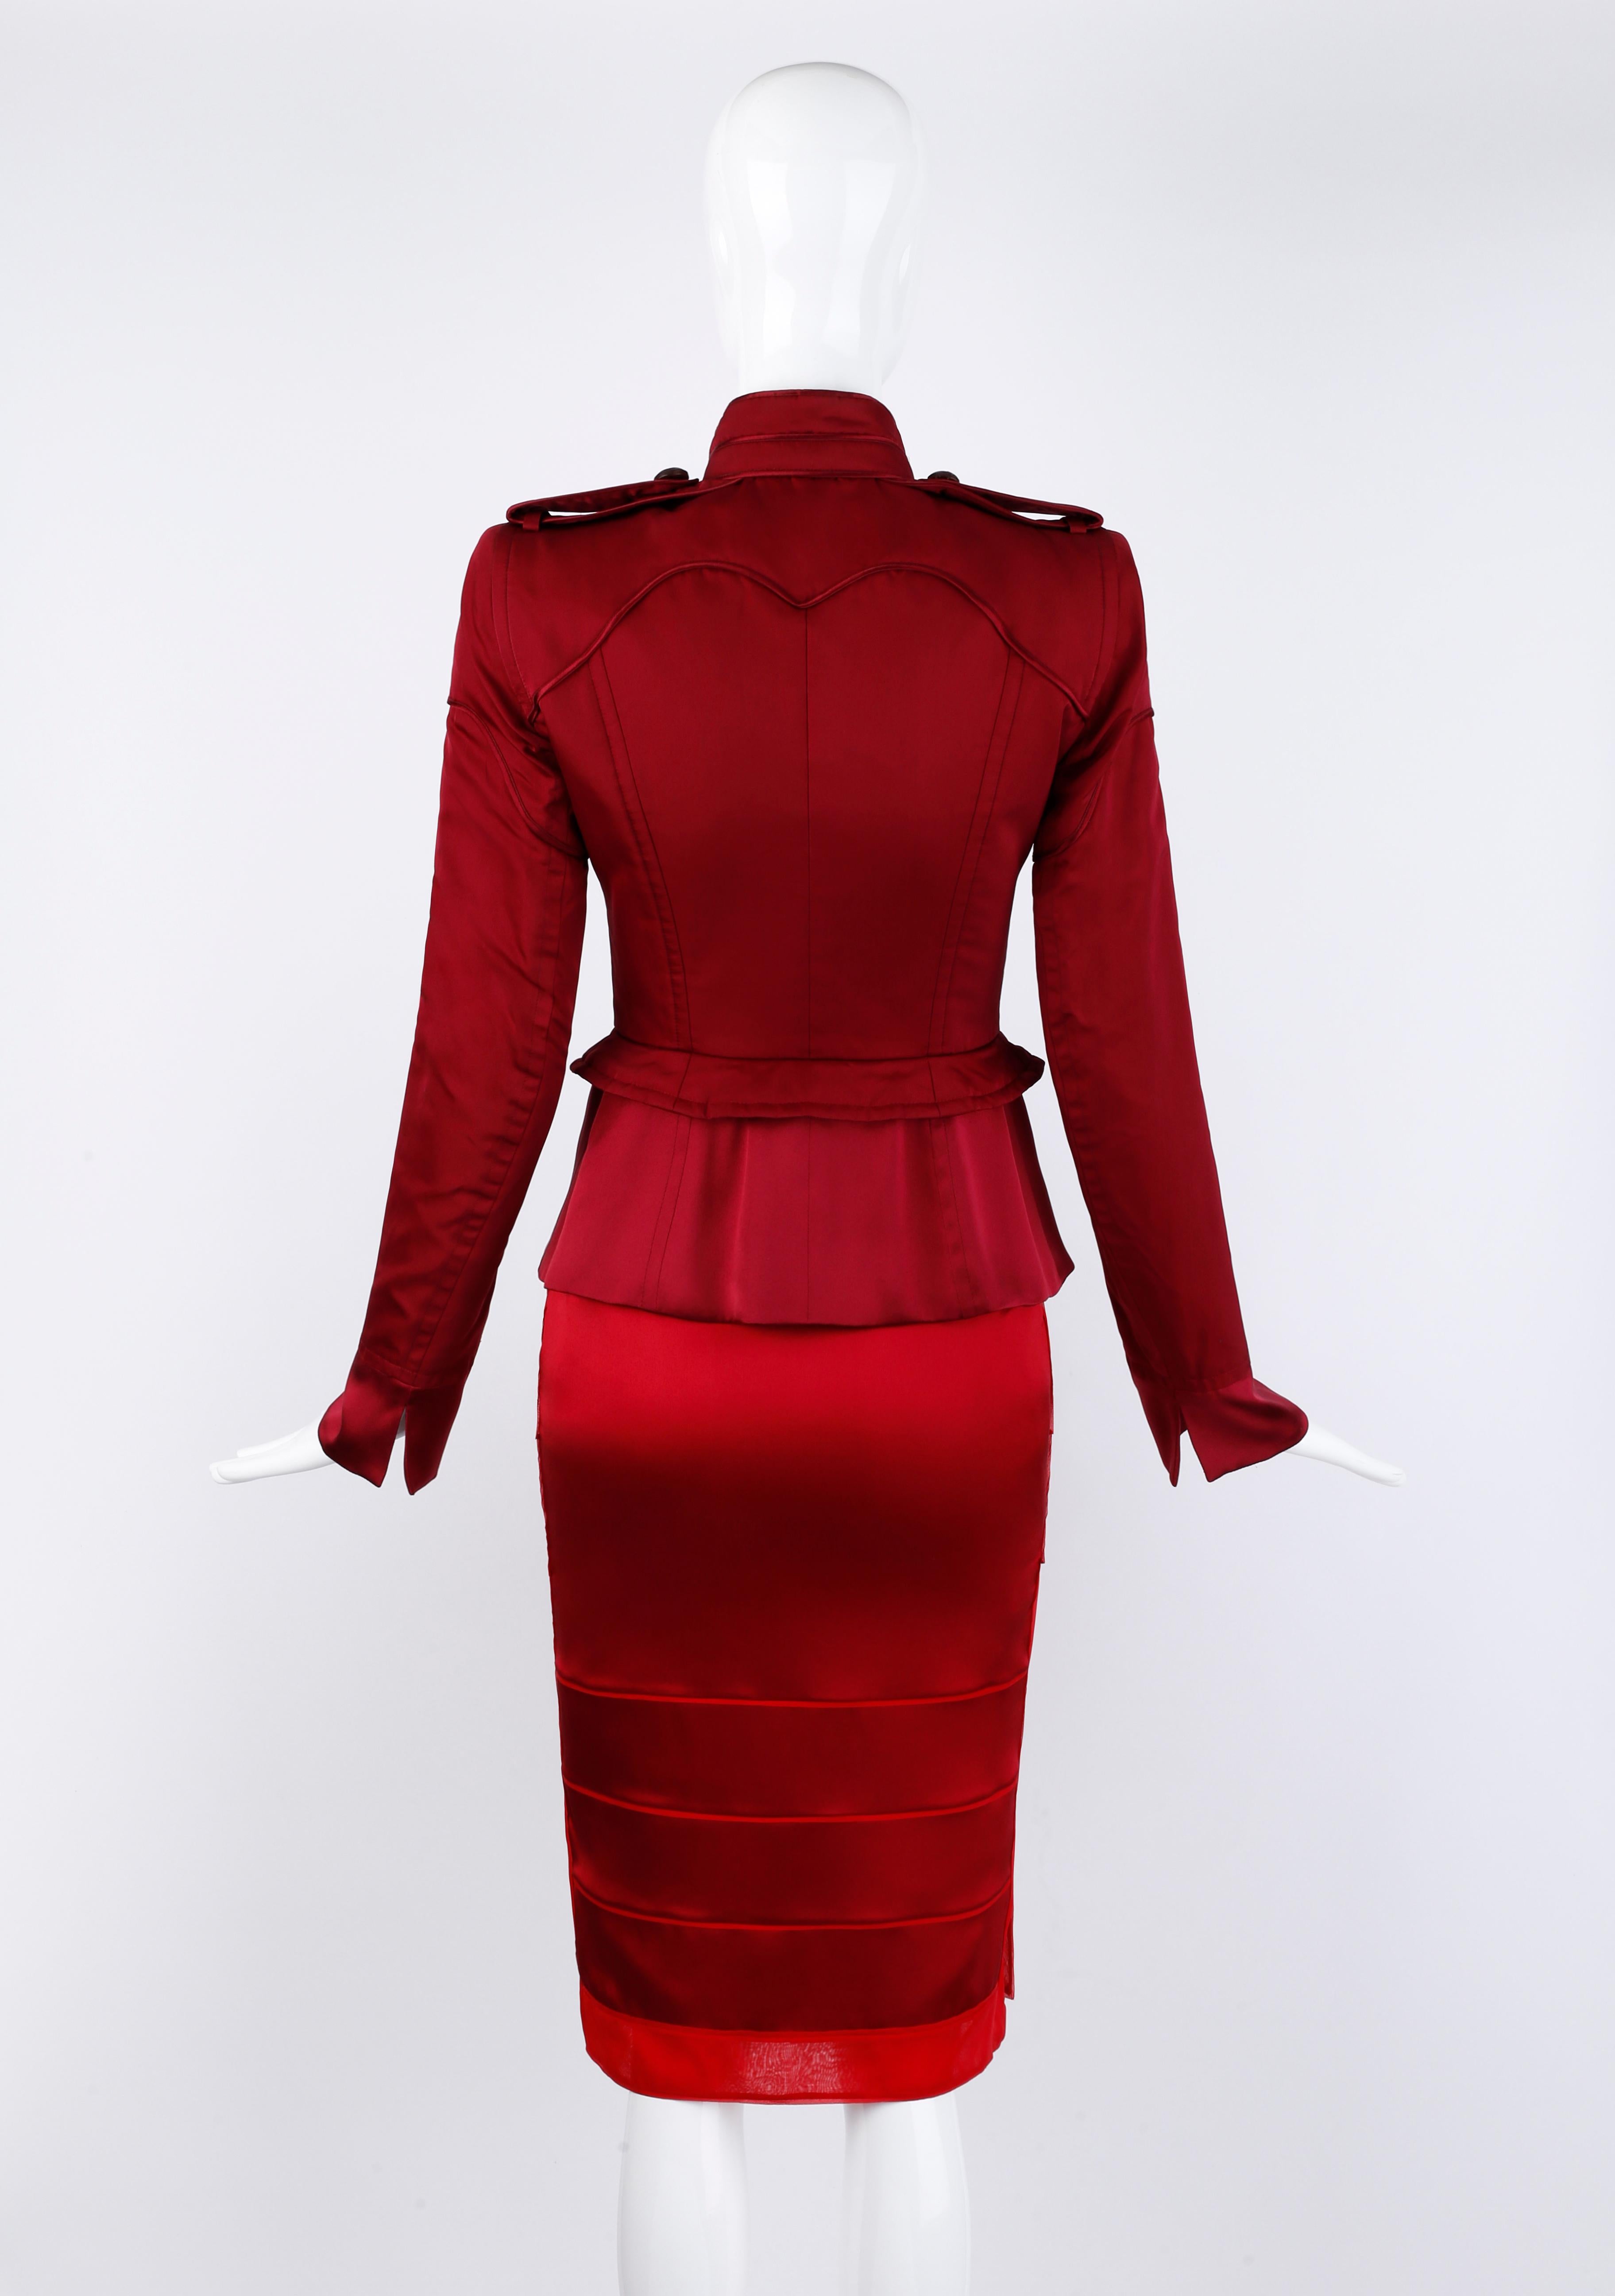 Women's Yves Saint Laurent Tom Ford F/W 2004 Red Maroon Silk Evening Jacket & Skirt Suit For Sale